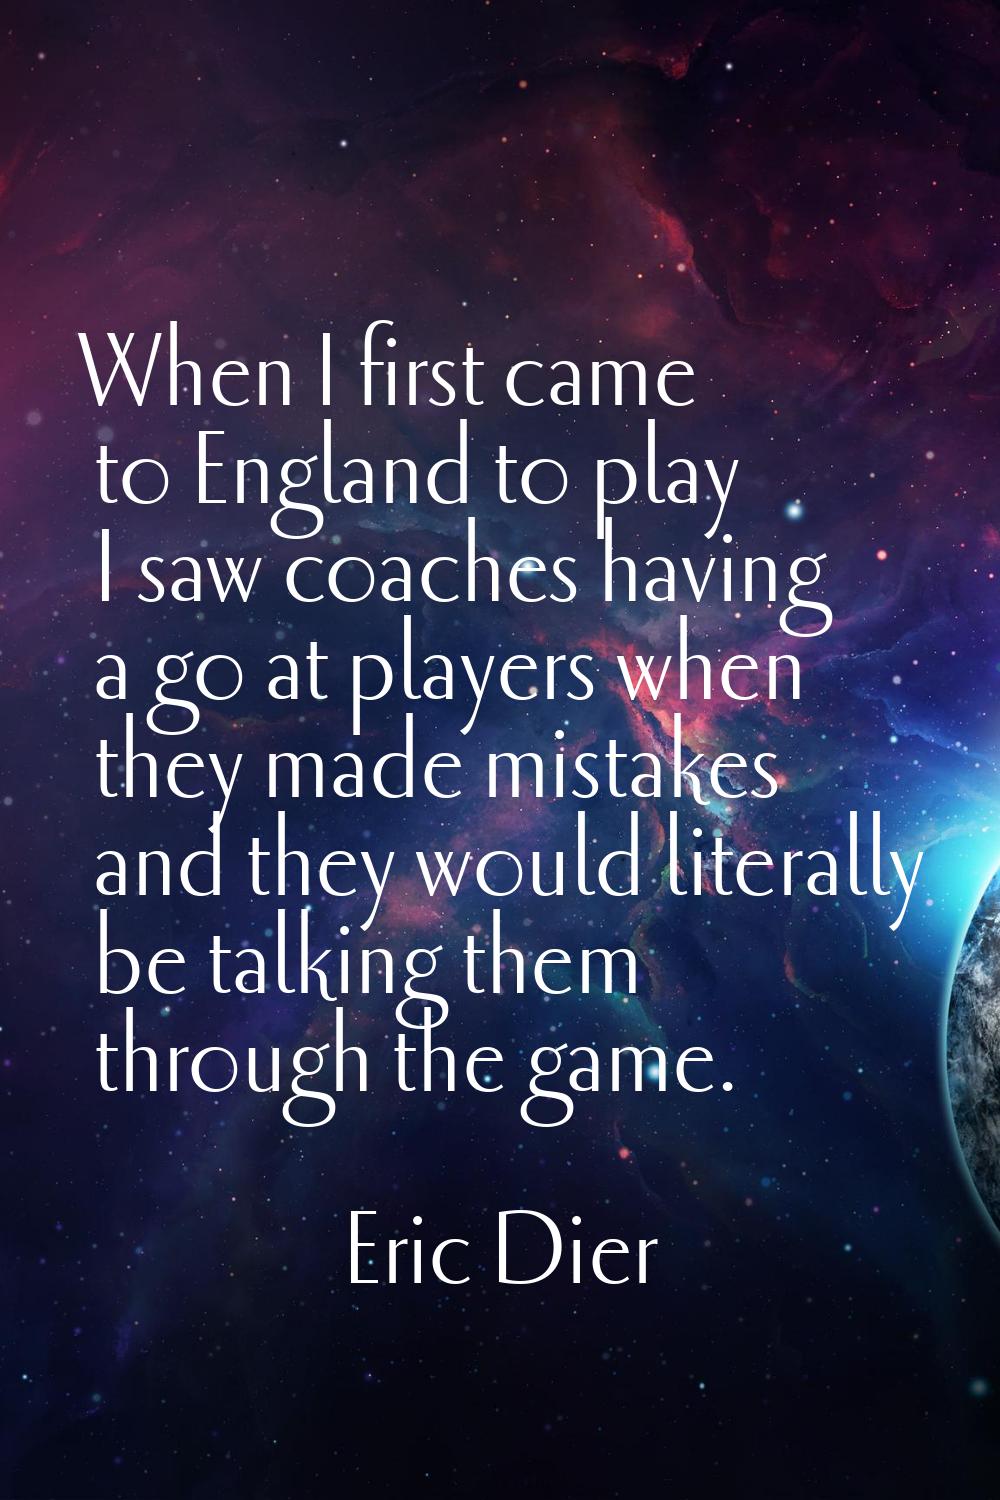 When I first came to England to play I saw coaches having a go at players when they made mistakes a